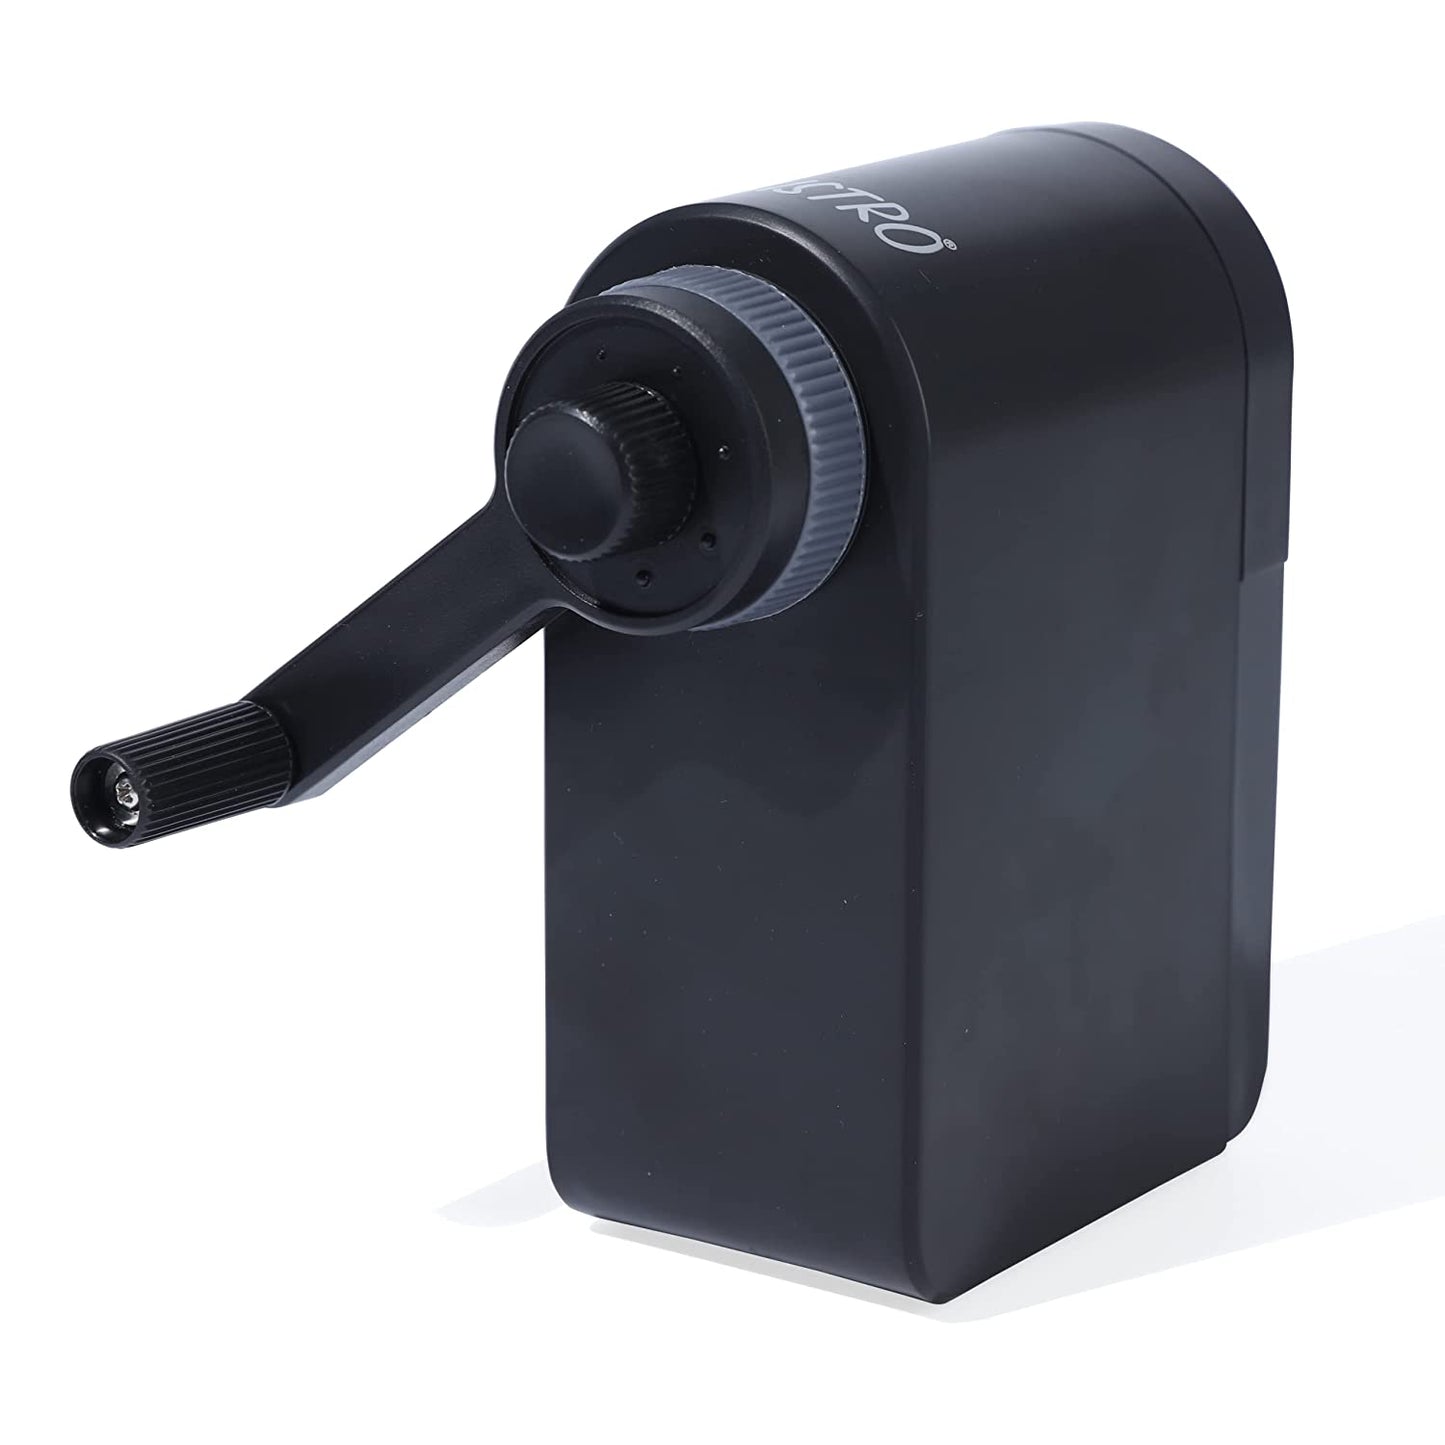 Brustro Manual Art Pencil Sharpener with Long Points